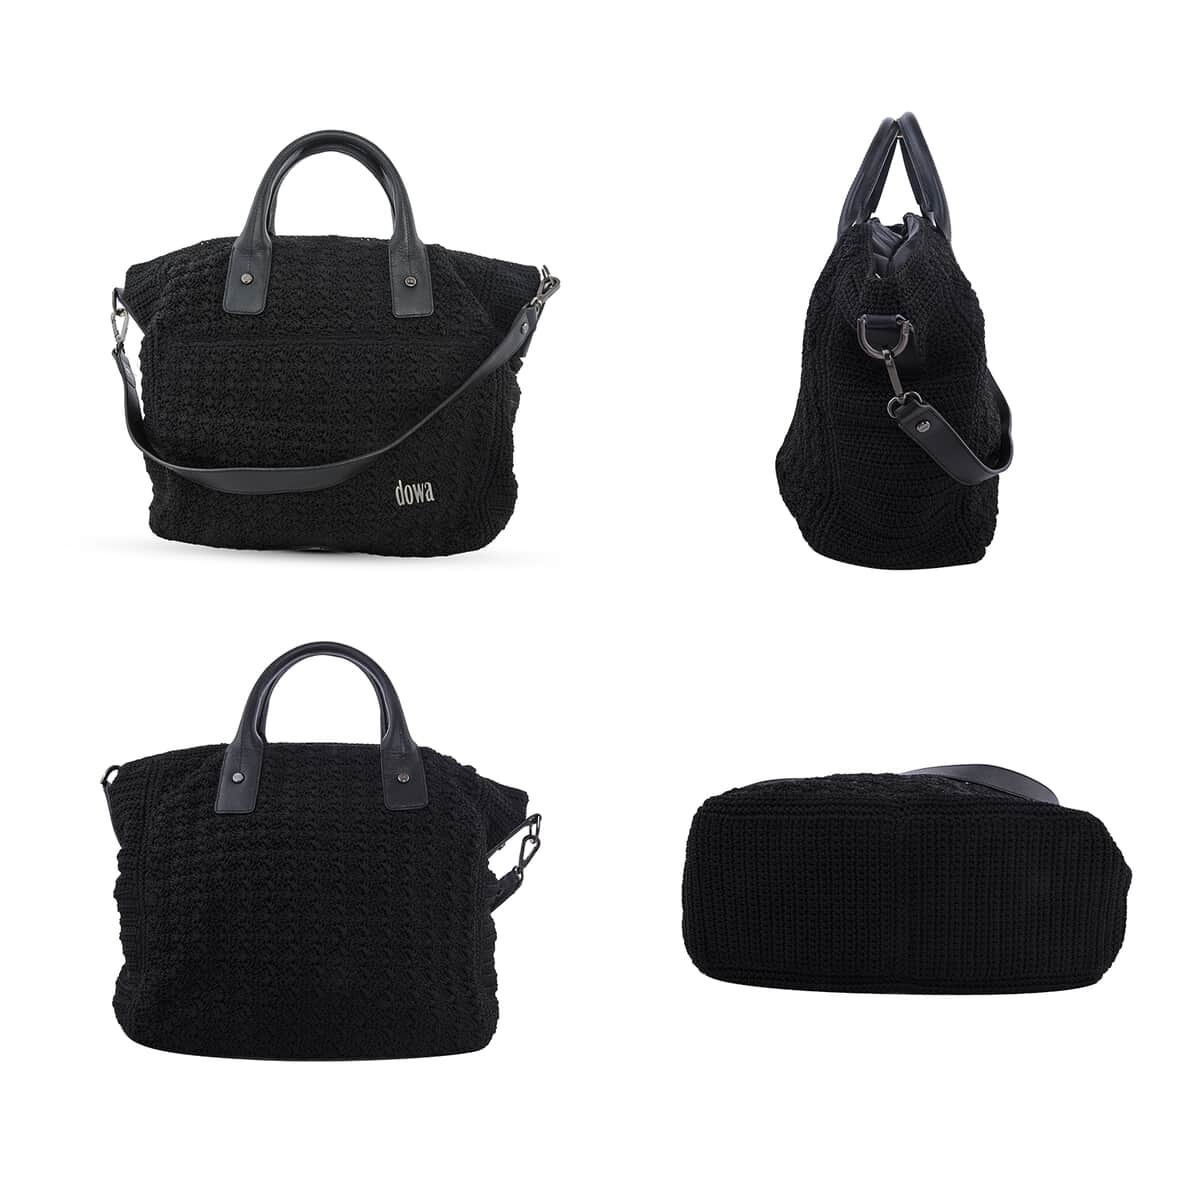 DOWA Black 100% Nylon with Leather Handwoven Tote Bag image number 1